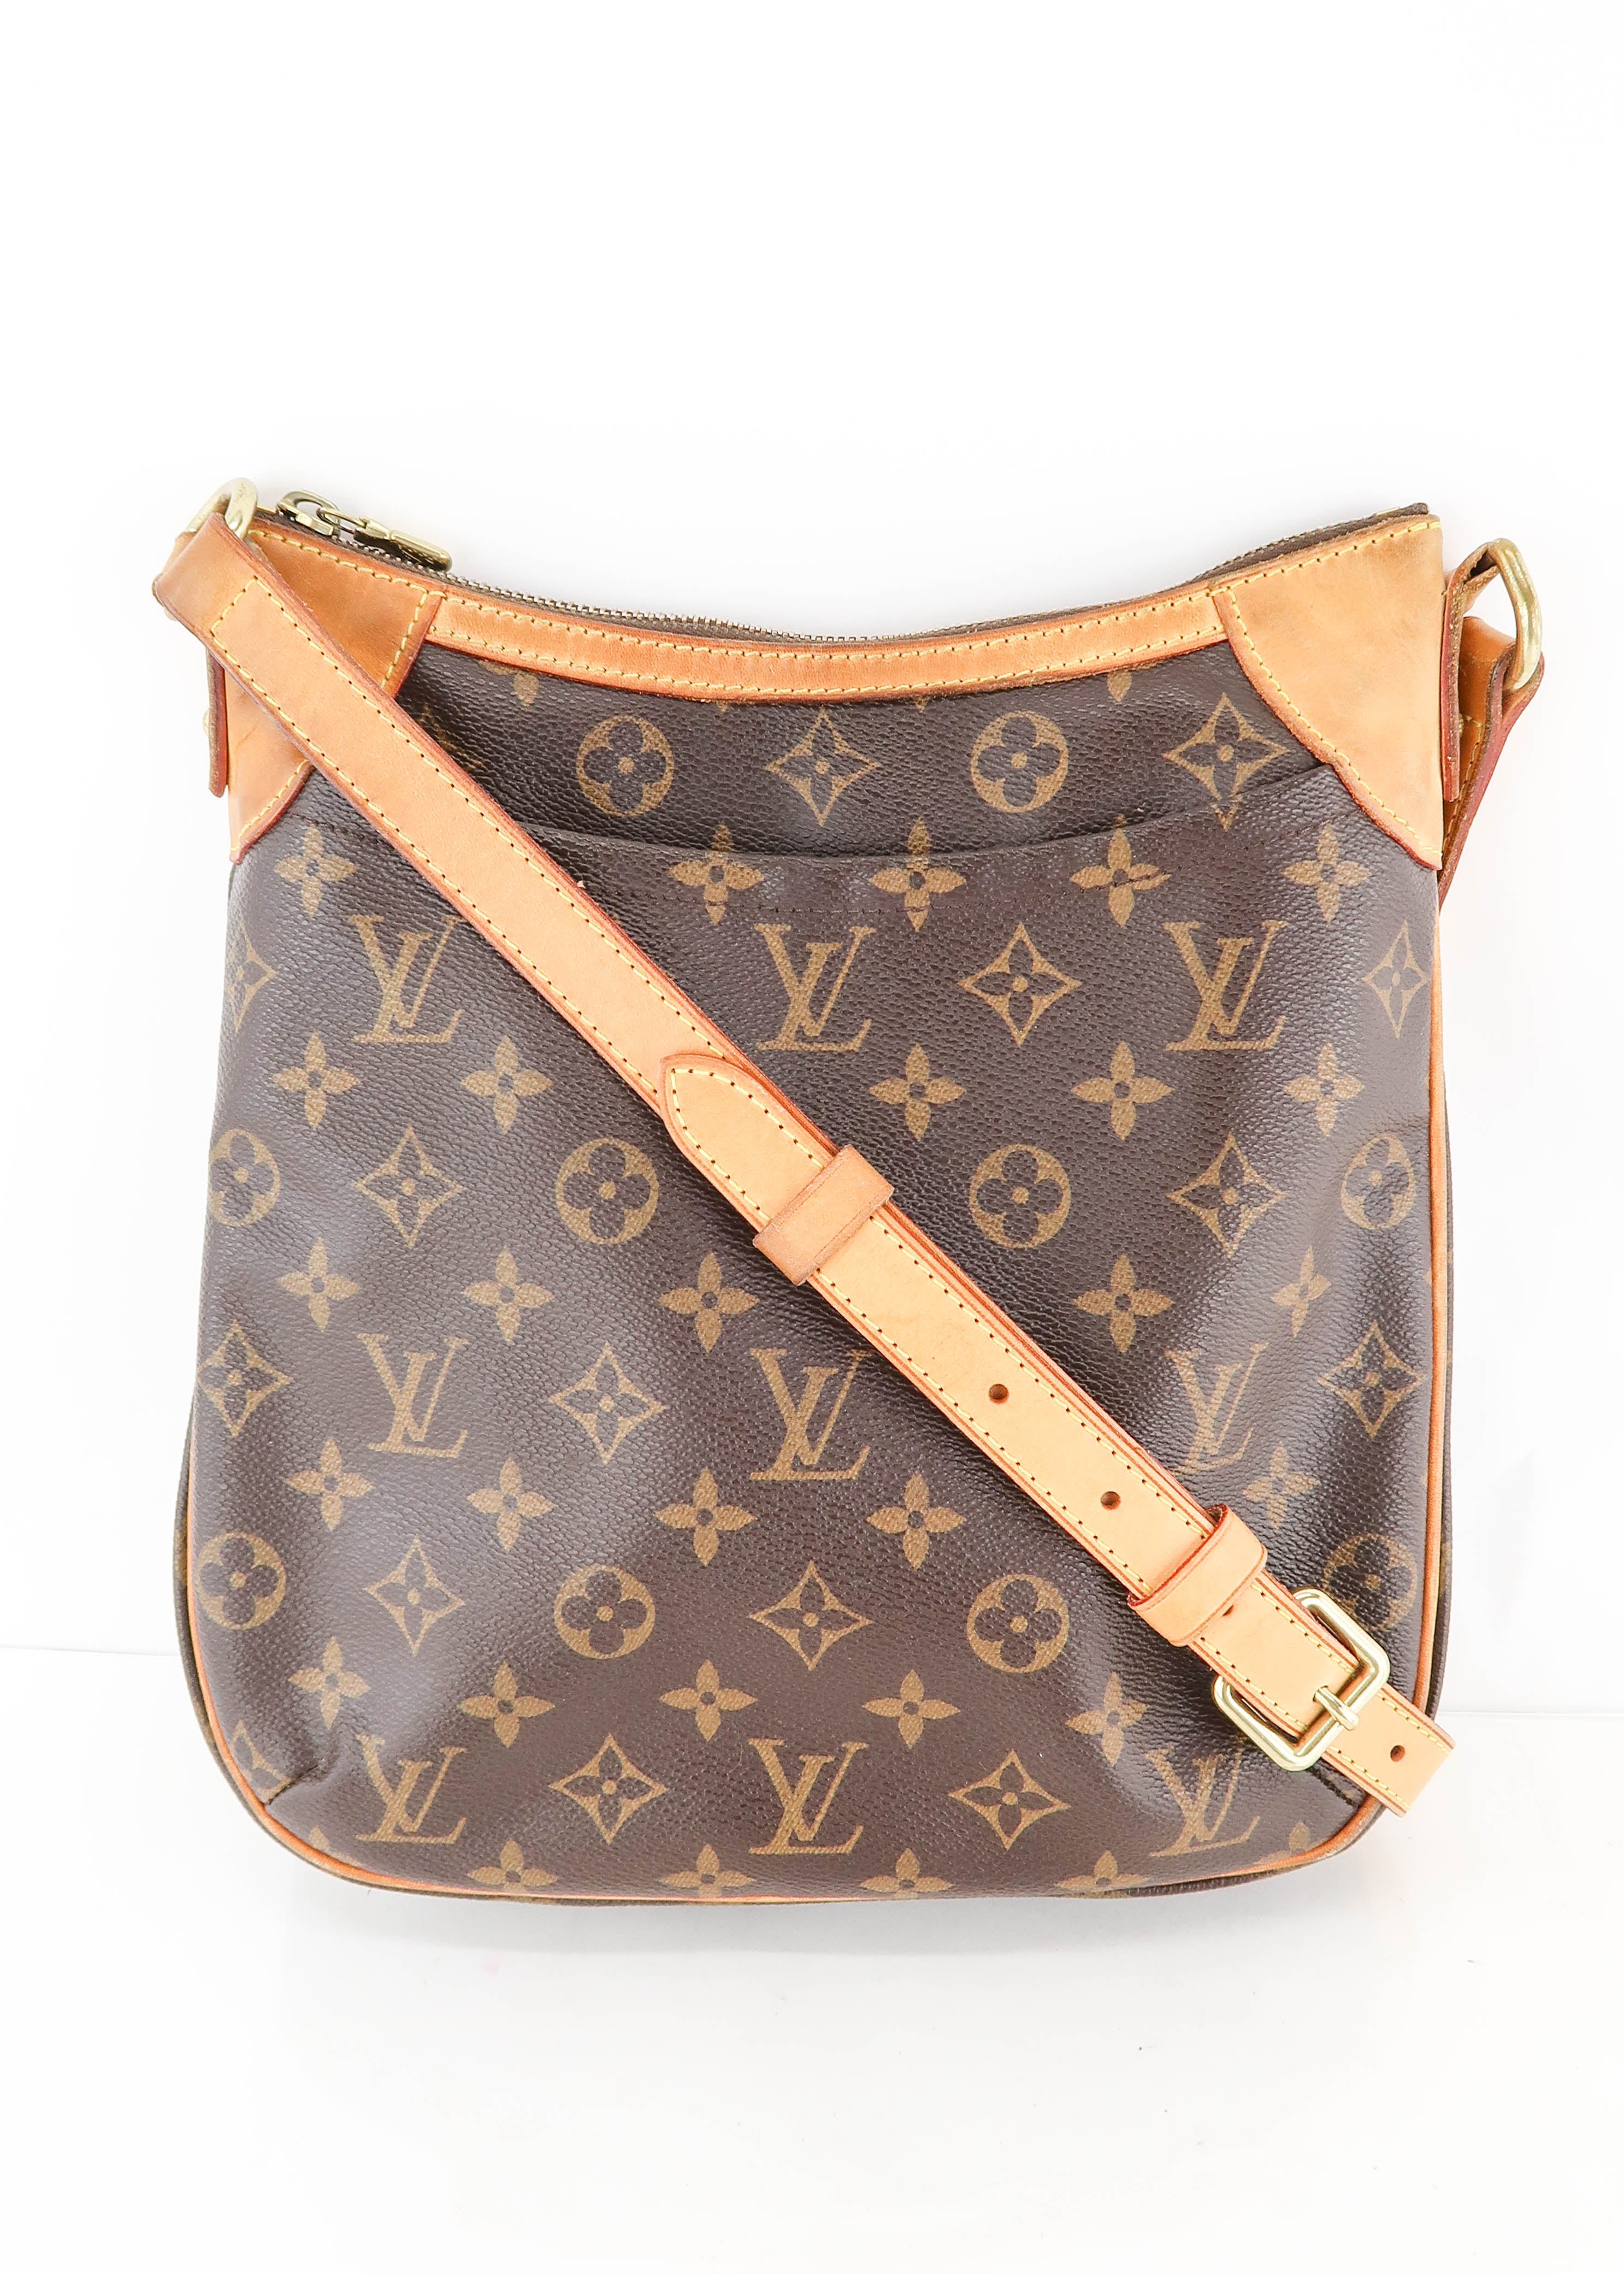 VERY RARE ❤️DISCONTINUED Authentic LV Odeon PM Crossbody